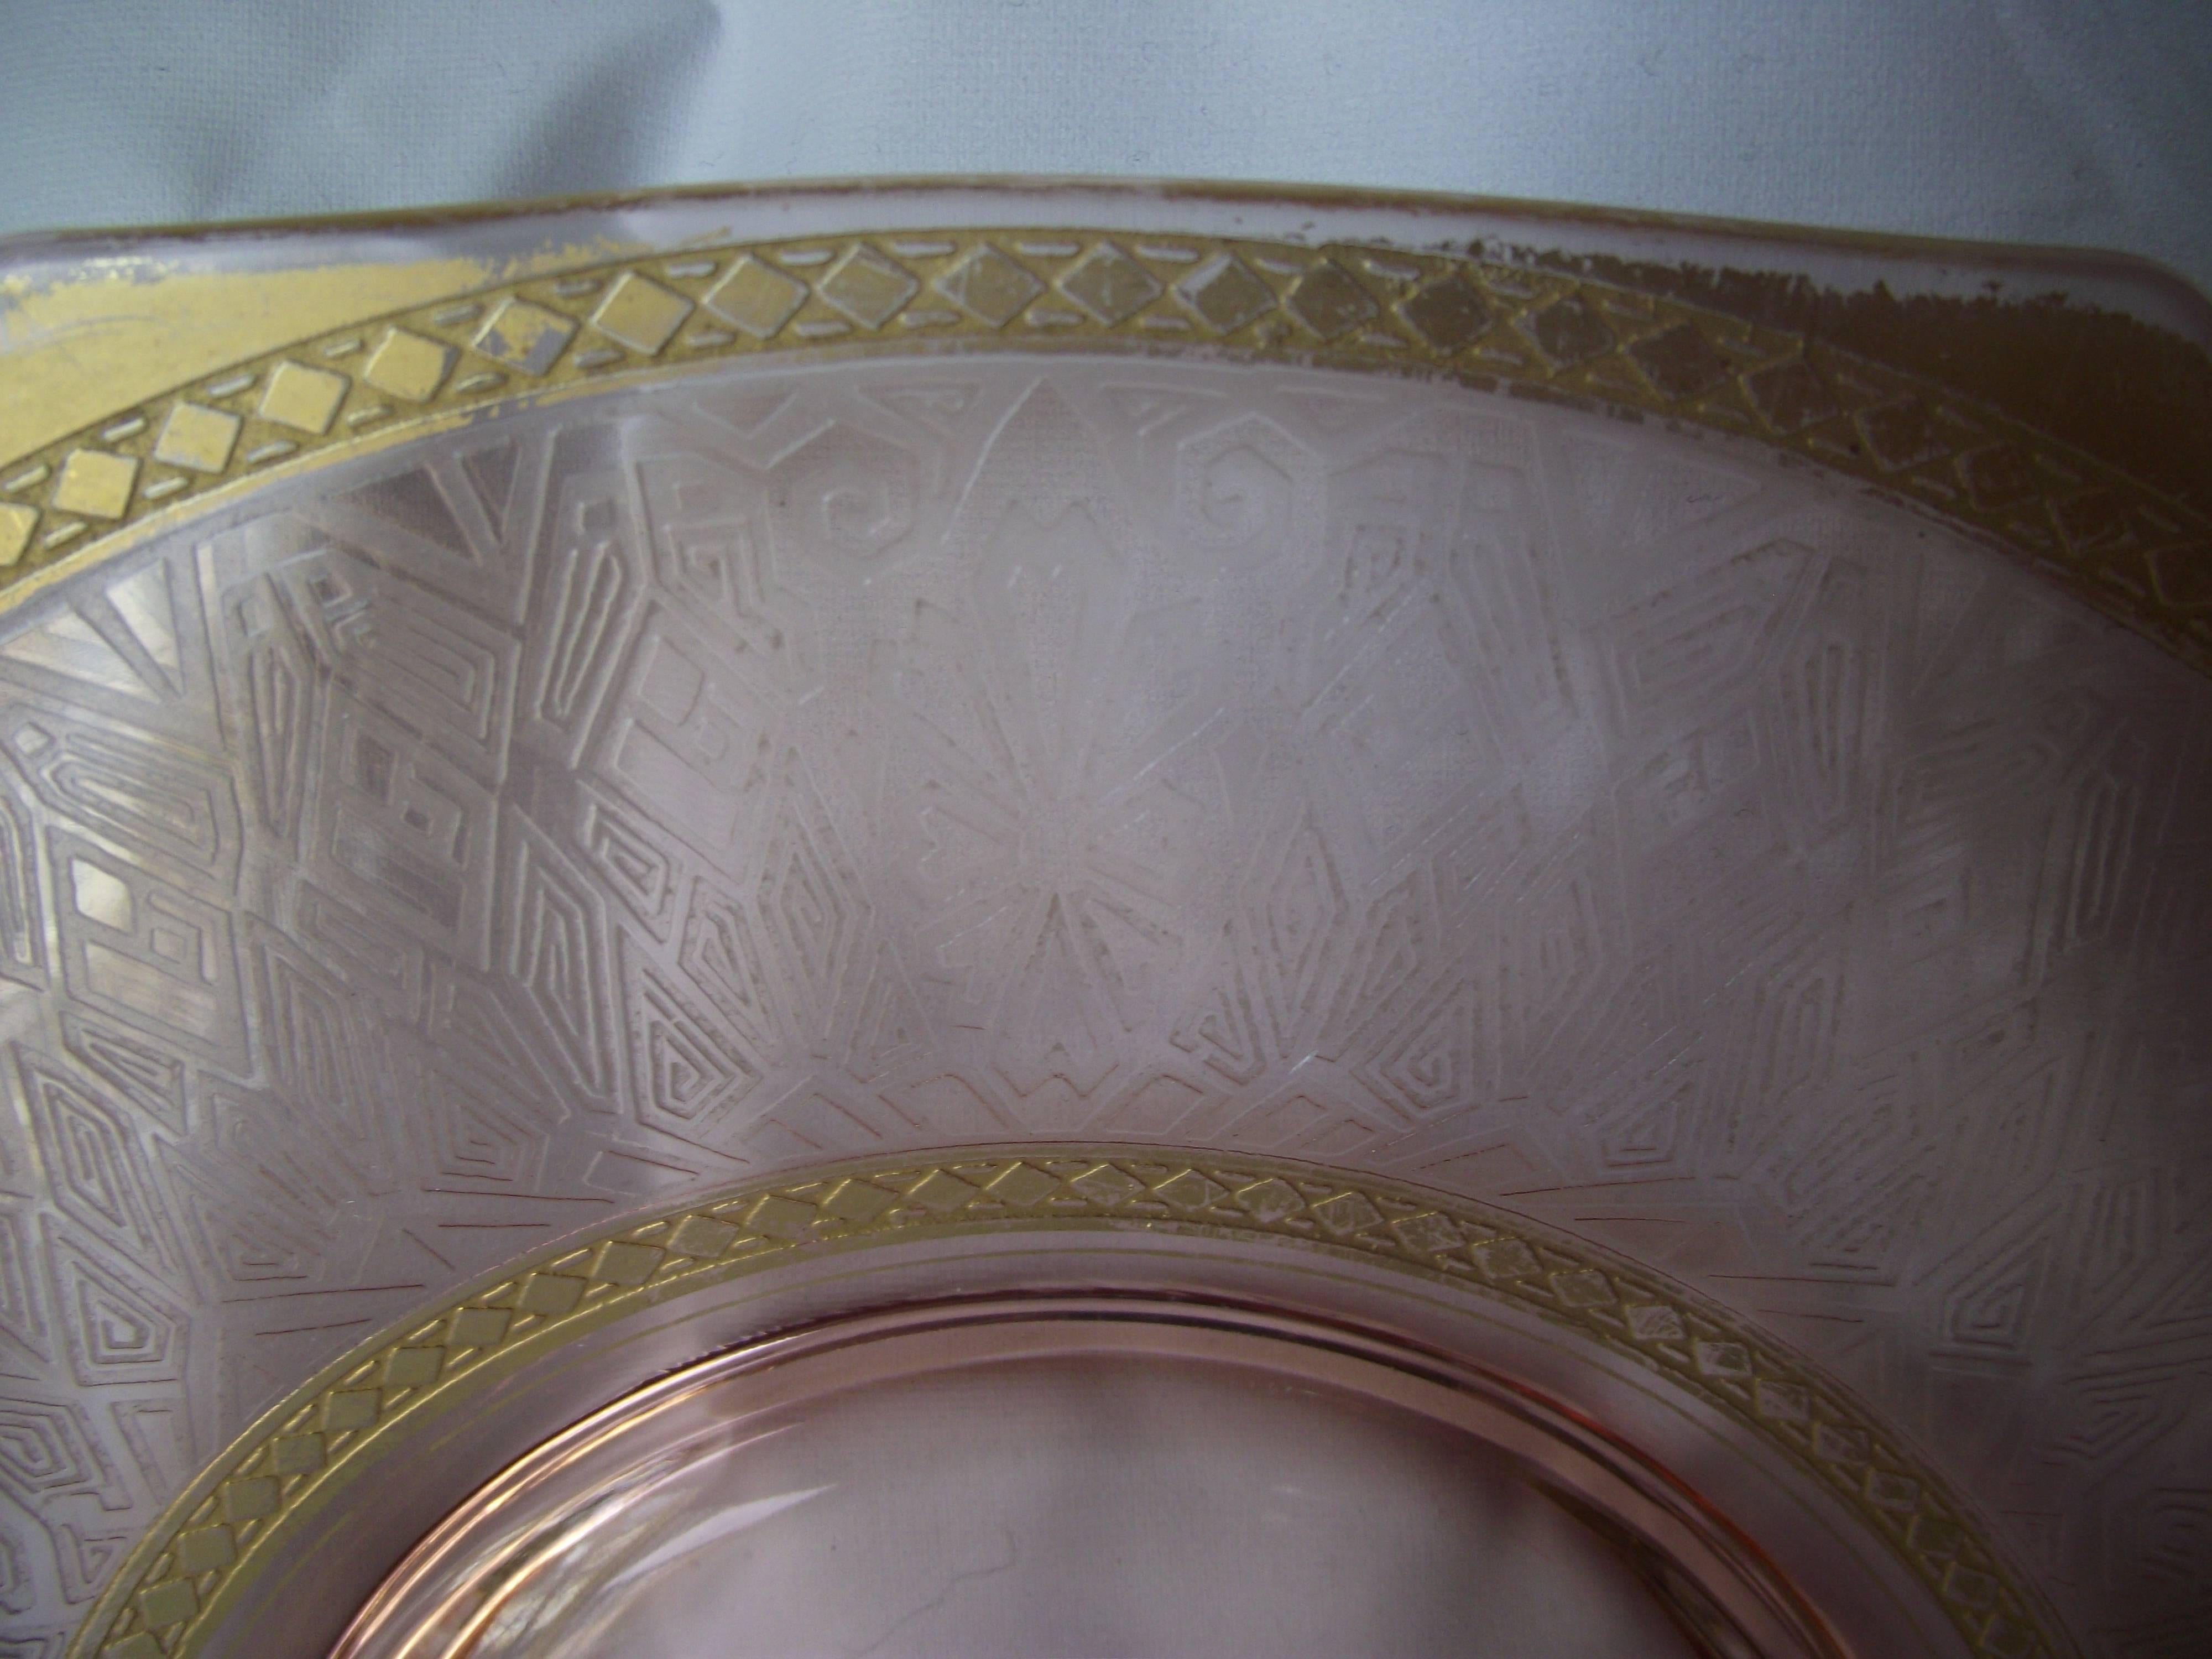 pink depression glass bowl with handles